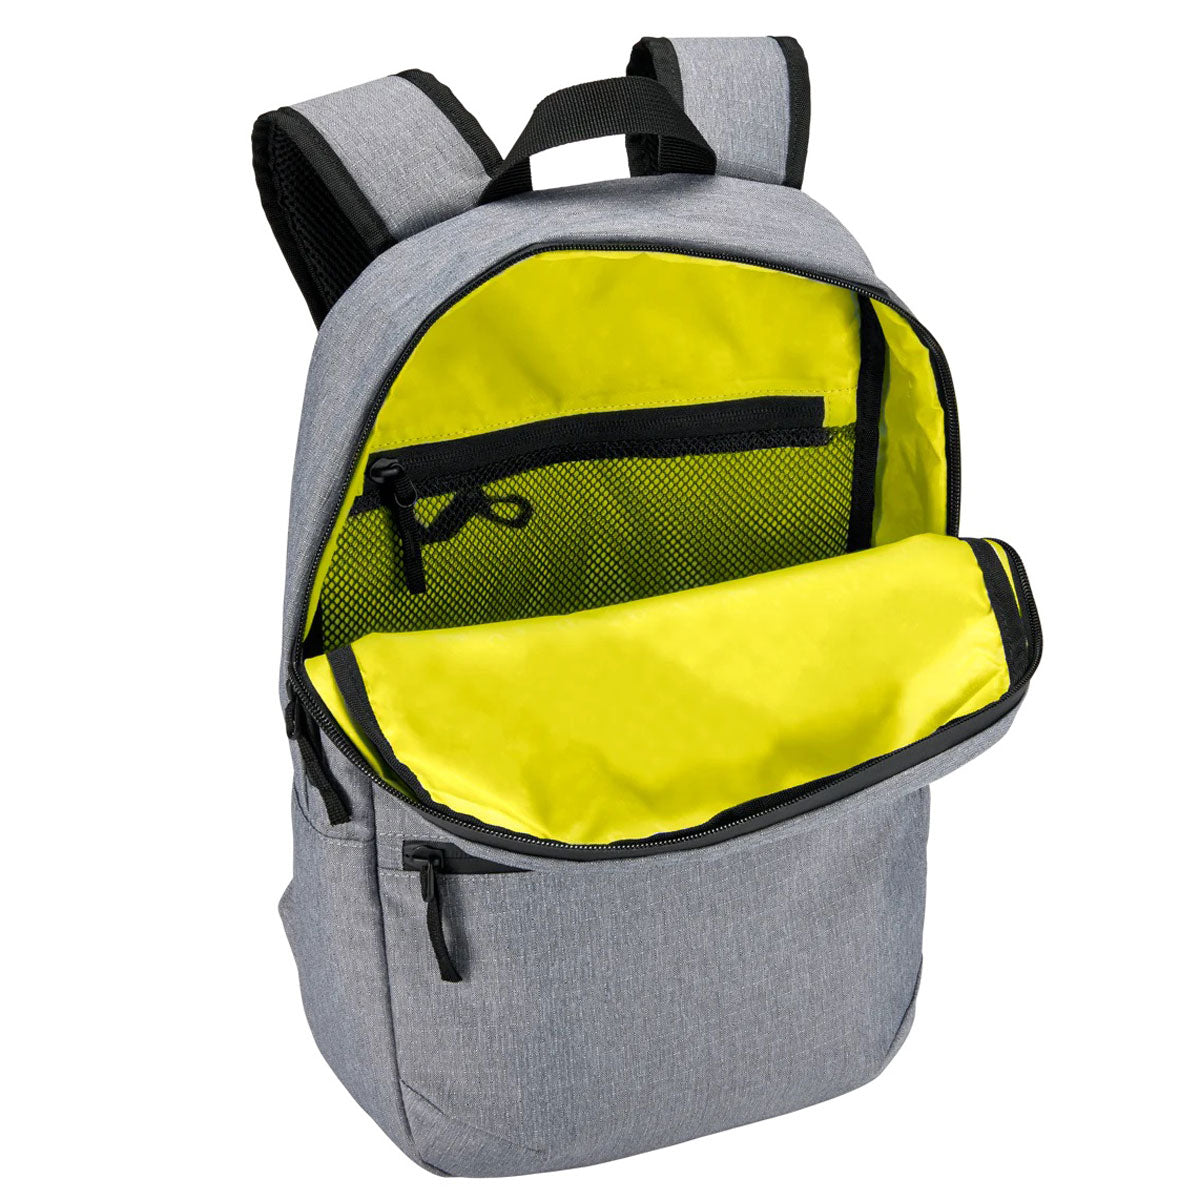 Nixon Day Trippin' Backpack - Heather Gray image 4